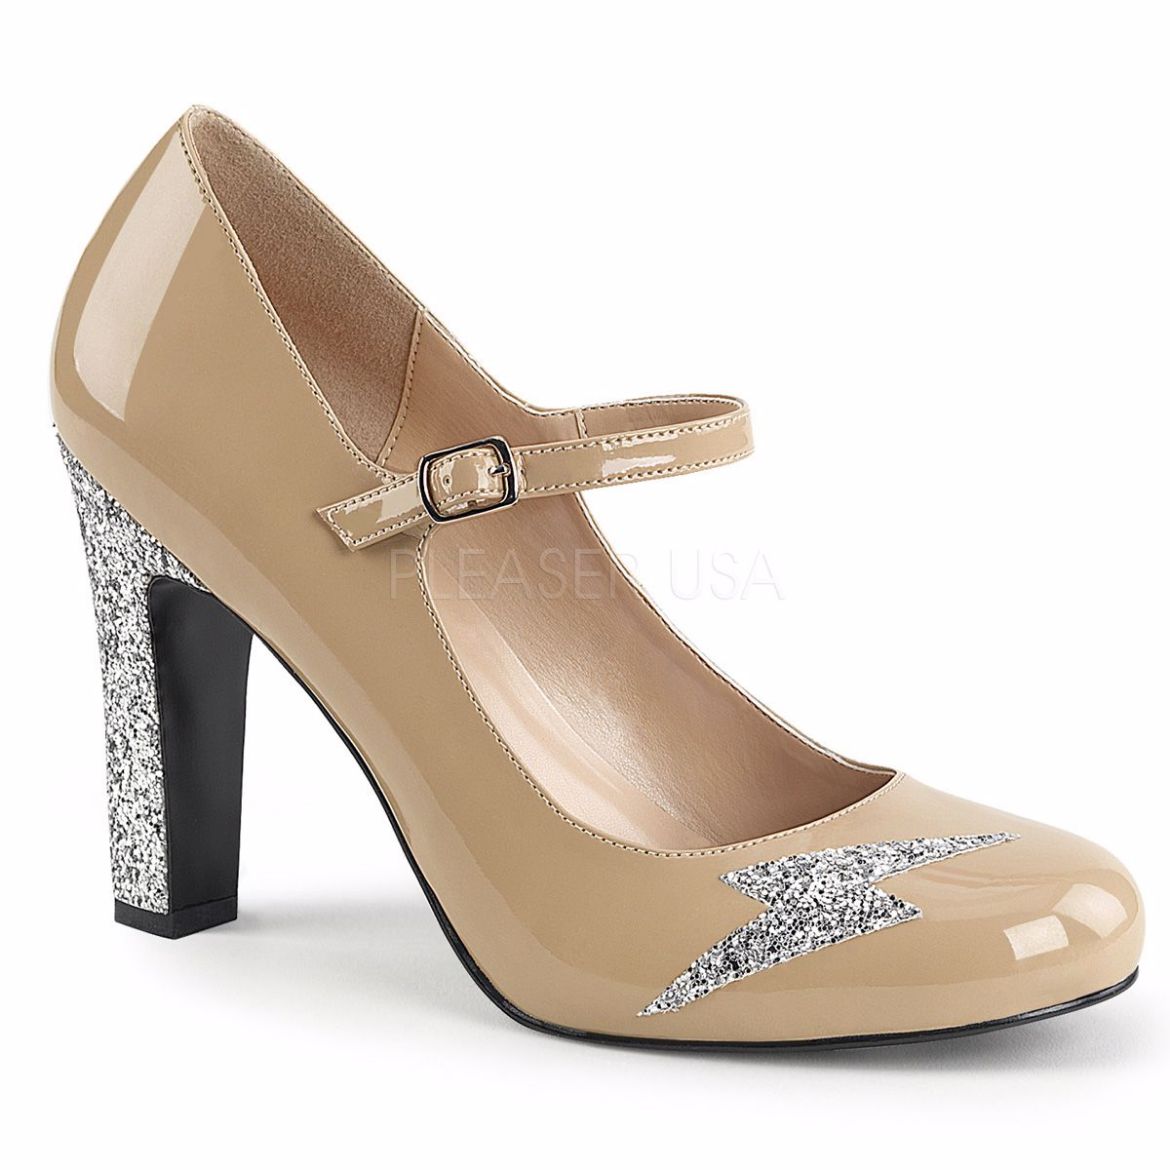 Product image of Pleaser Pink Label Queen-02 Cream Patent-Silver Glitter, 4 inch (10.2 cm) Heel Court Pump Shoes